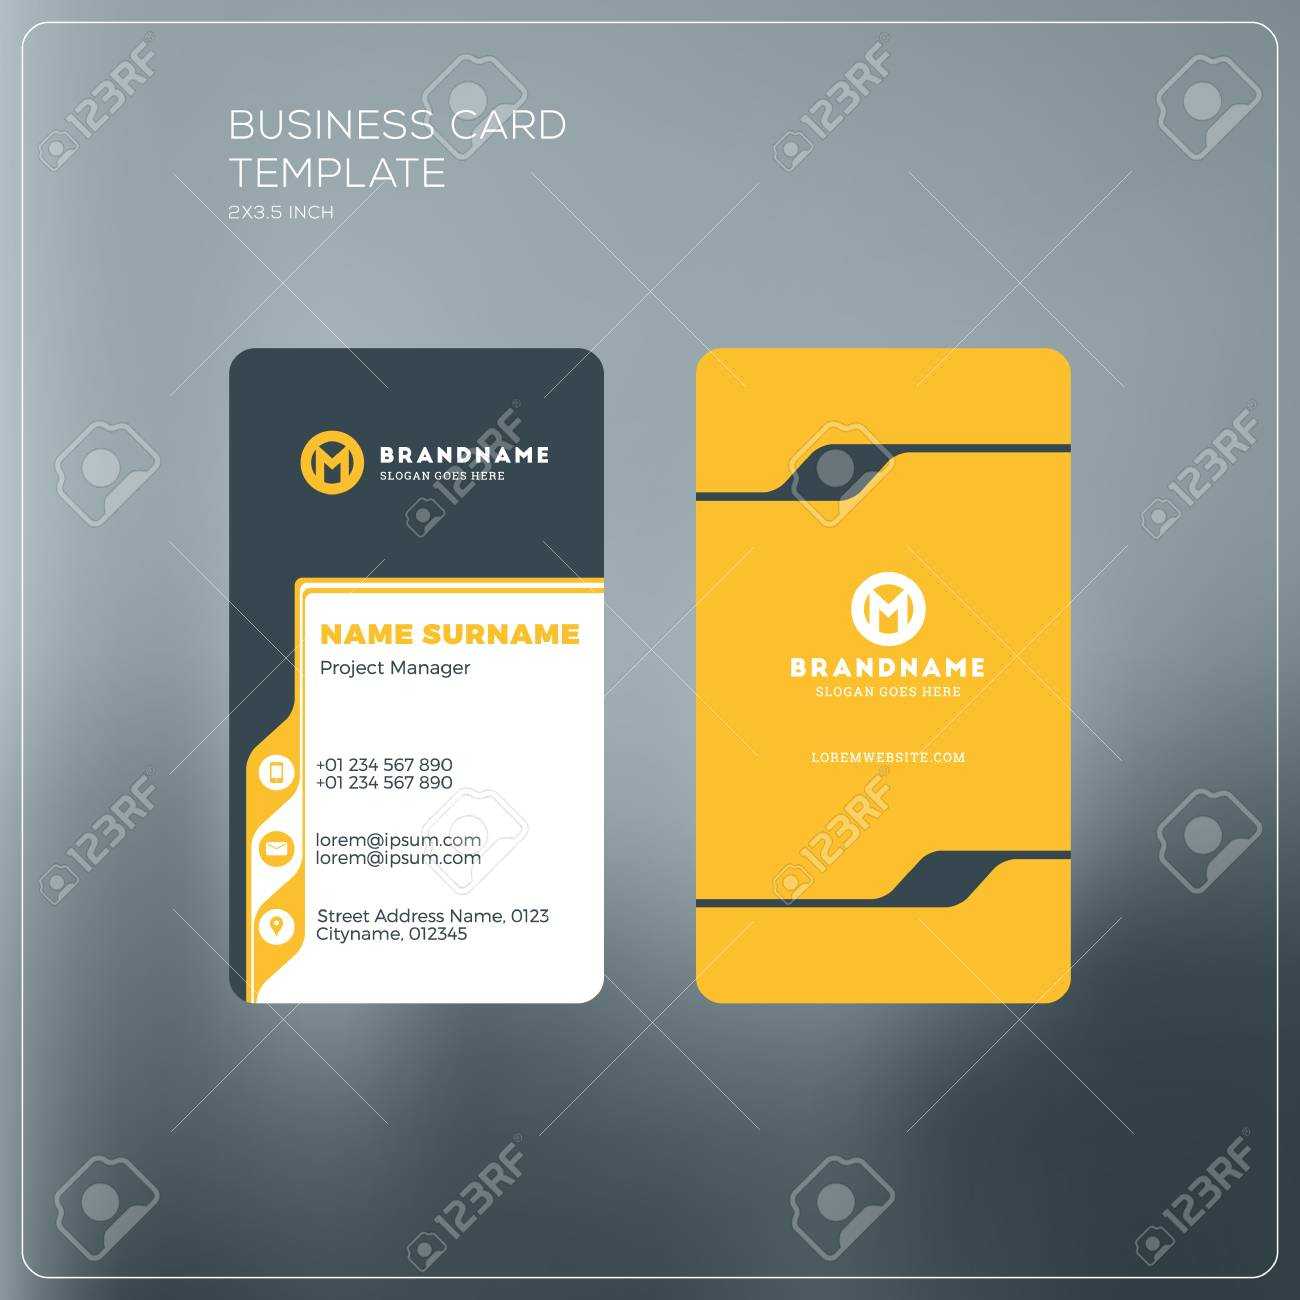 Personal Business Cards Template With Business Cards For Teachers Templates Free